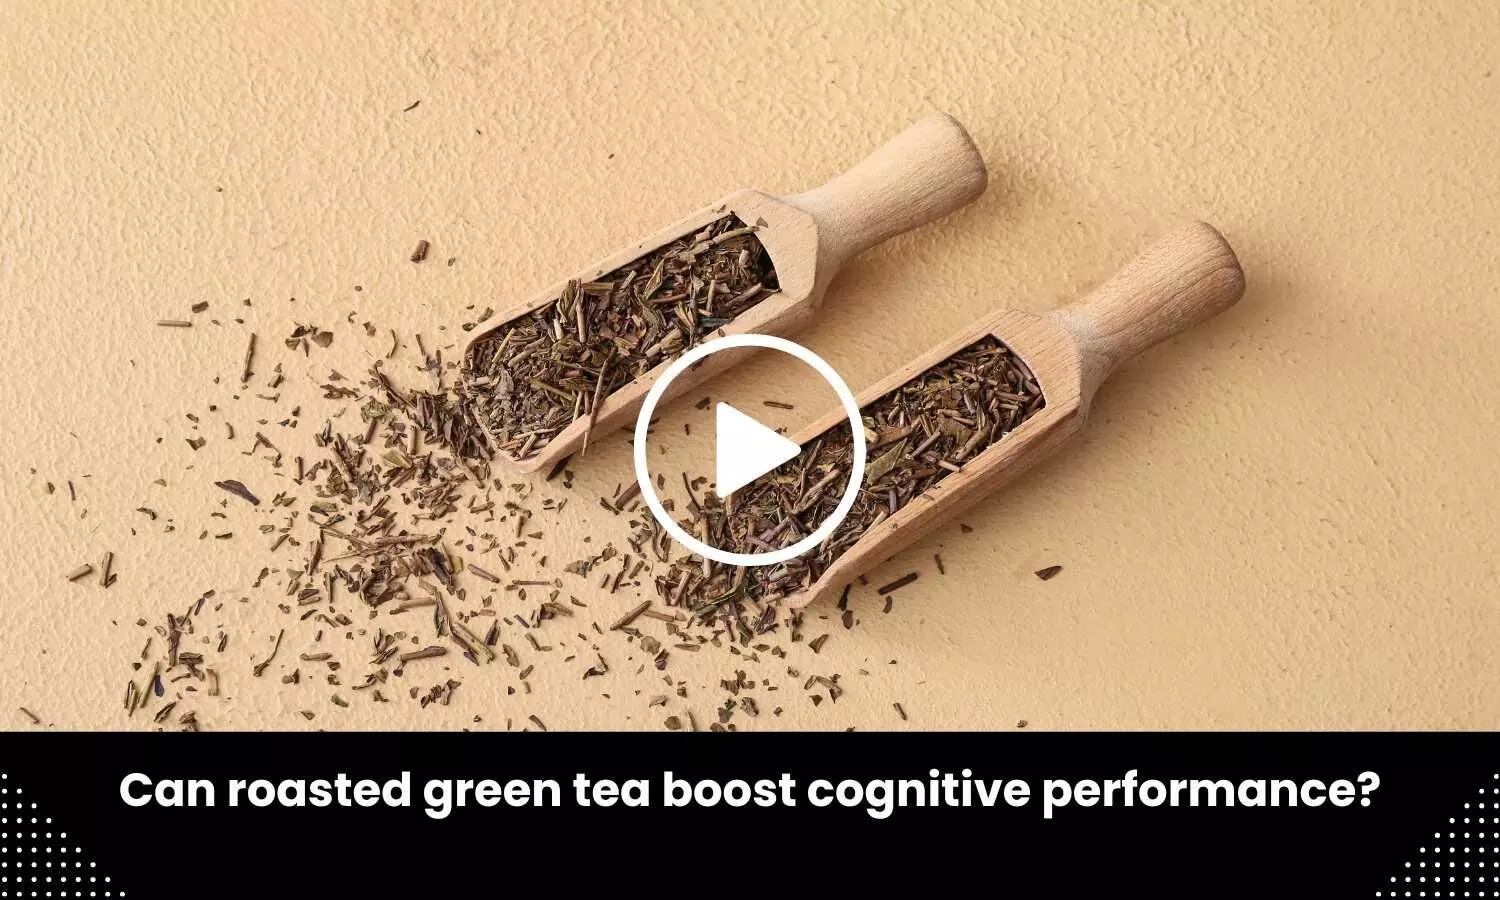 Can roasted green tea boost cognitive performance?